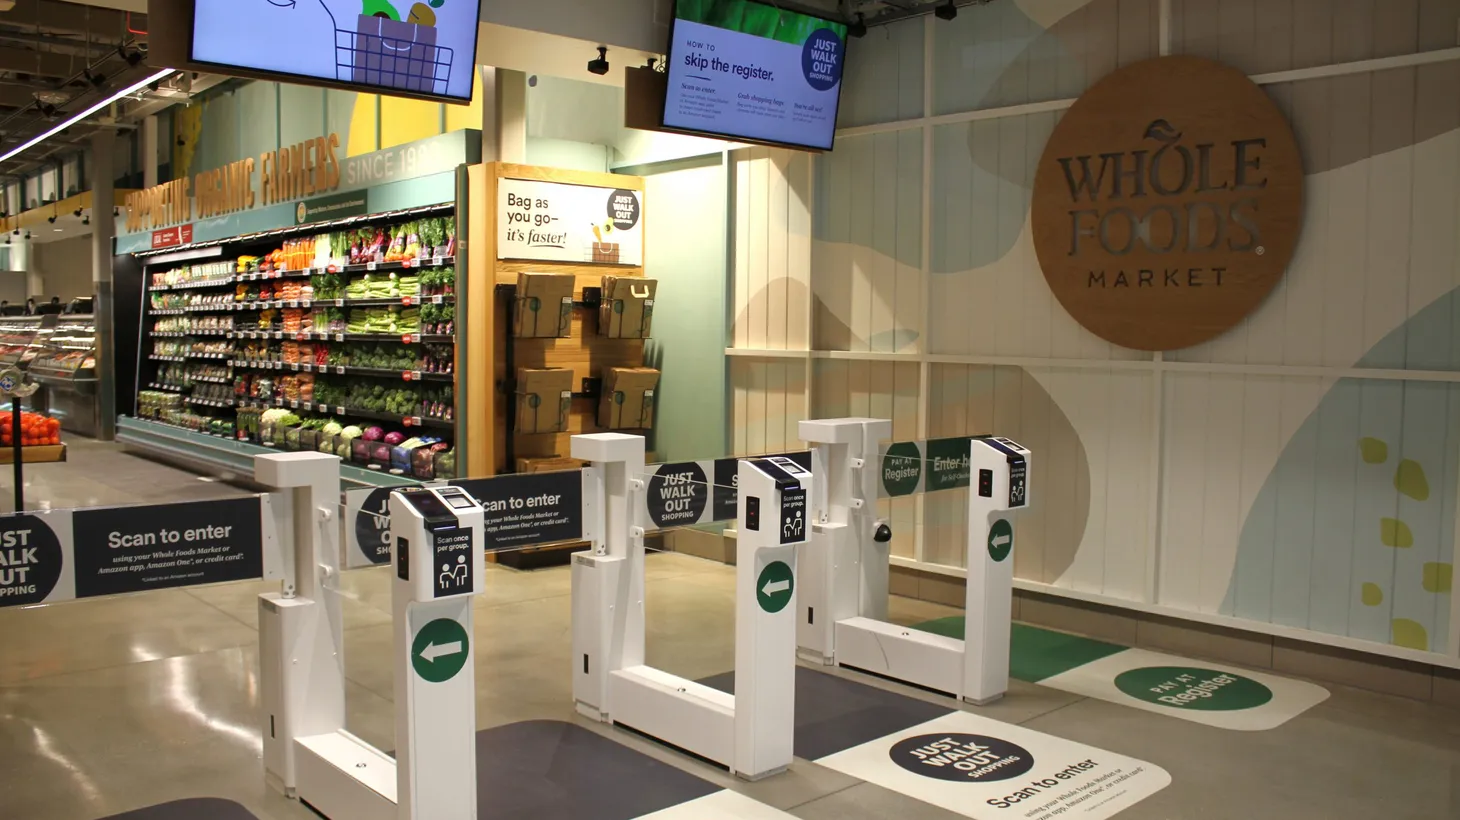 At the entrance of Whole Foods in Sherman Oaks, customers scan a QR code or their palm to begin shopping.